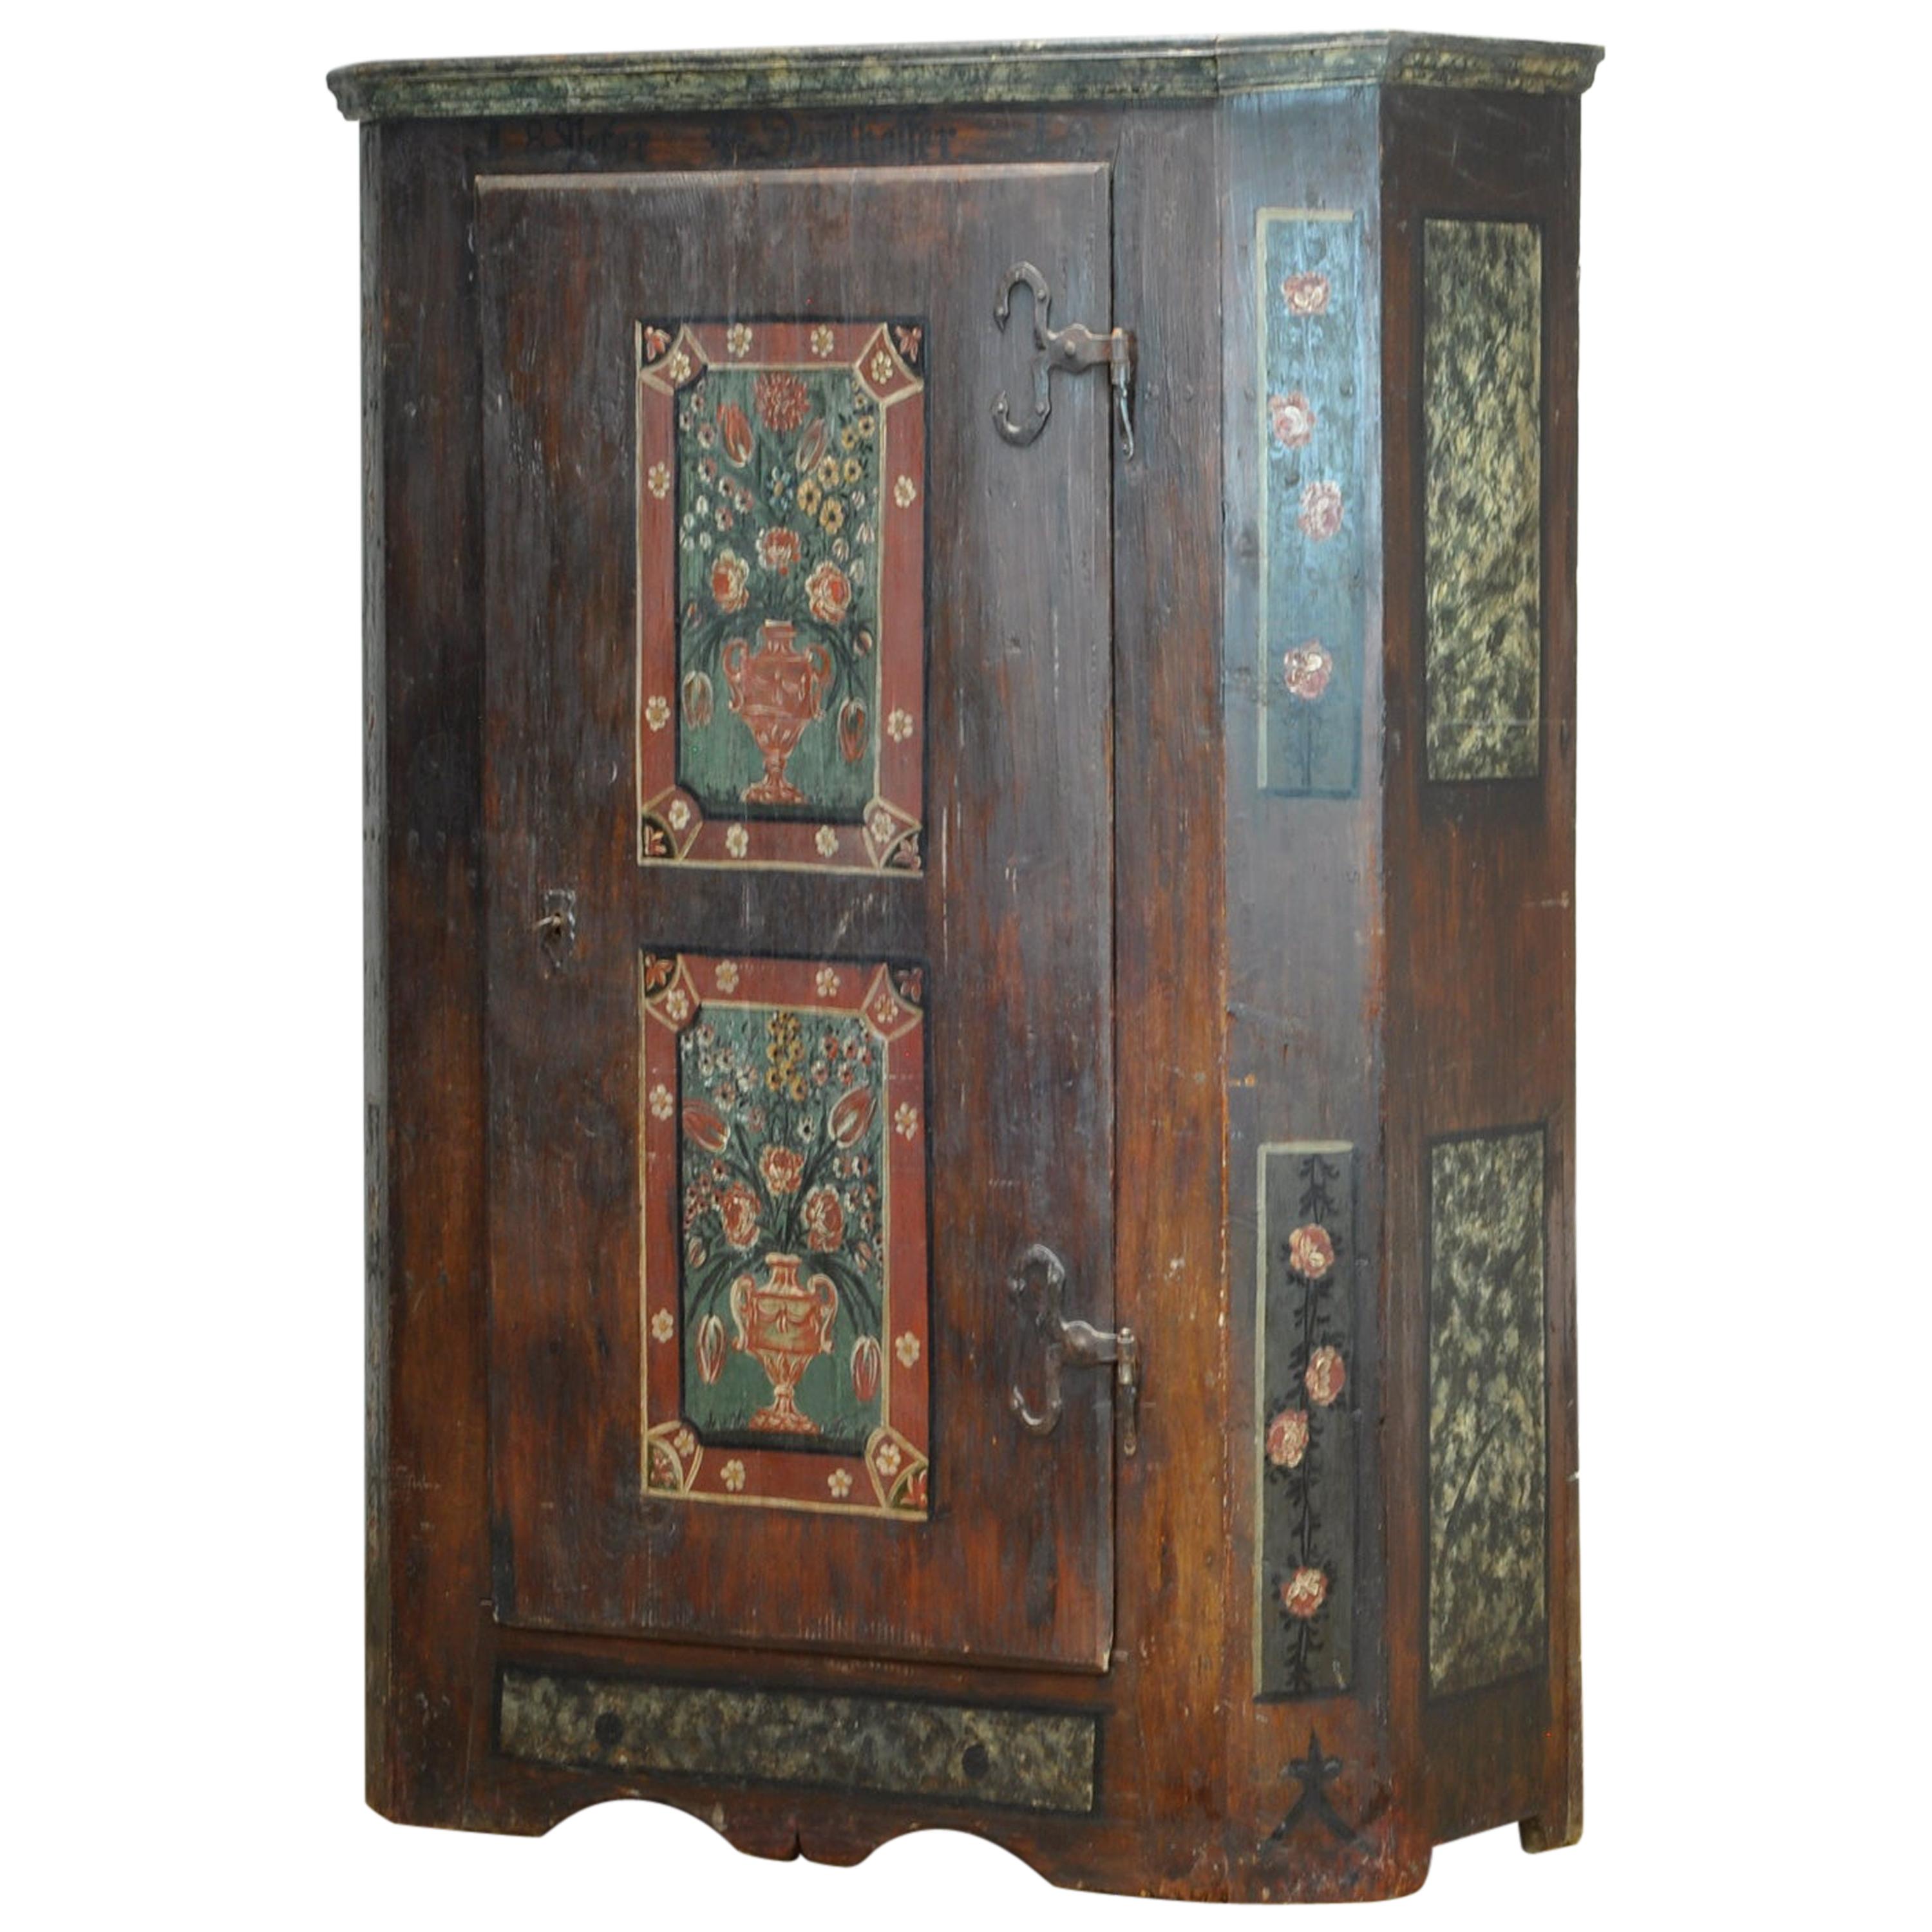 German Hand Painted Cabinet from 1812